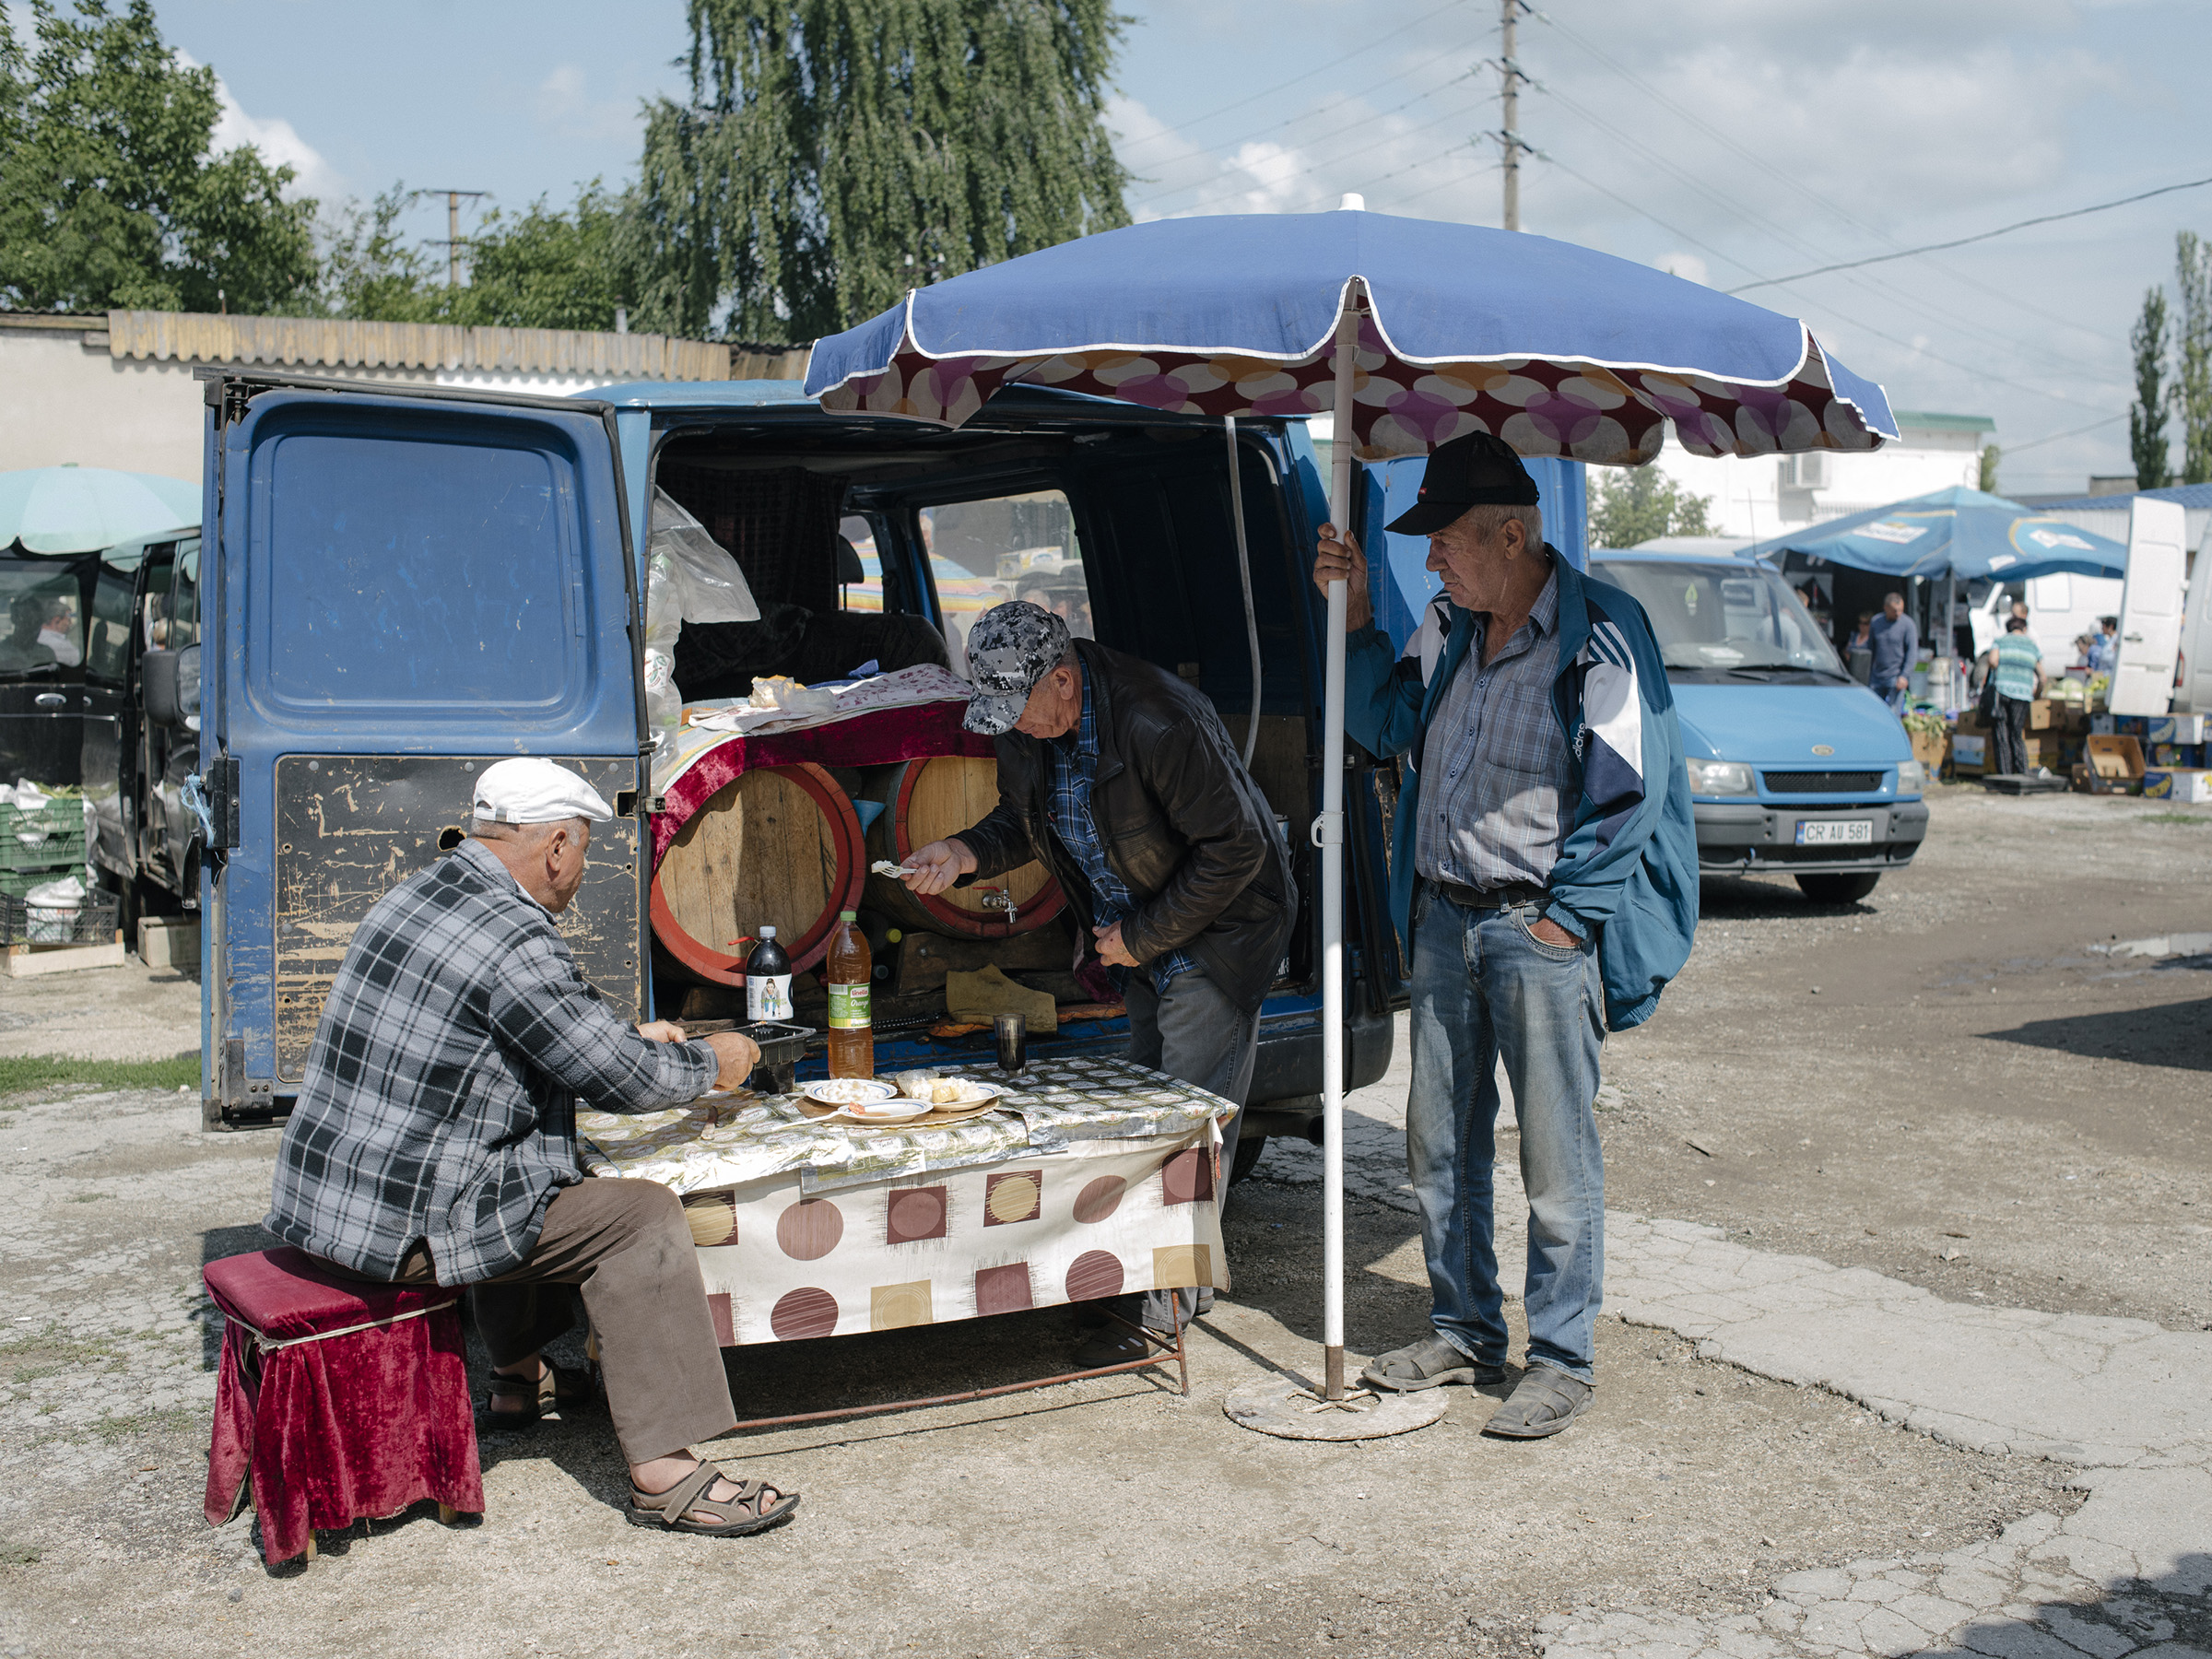 Gheorghe sells homemade wine at the Sunday markey in Straseni, Moldova, on Aug. 2, 2019. (Ramin Mazur for TIME)